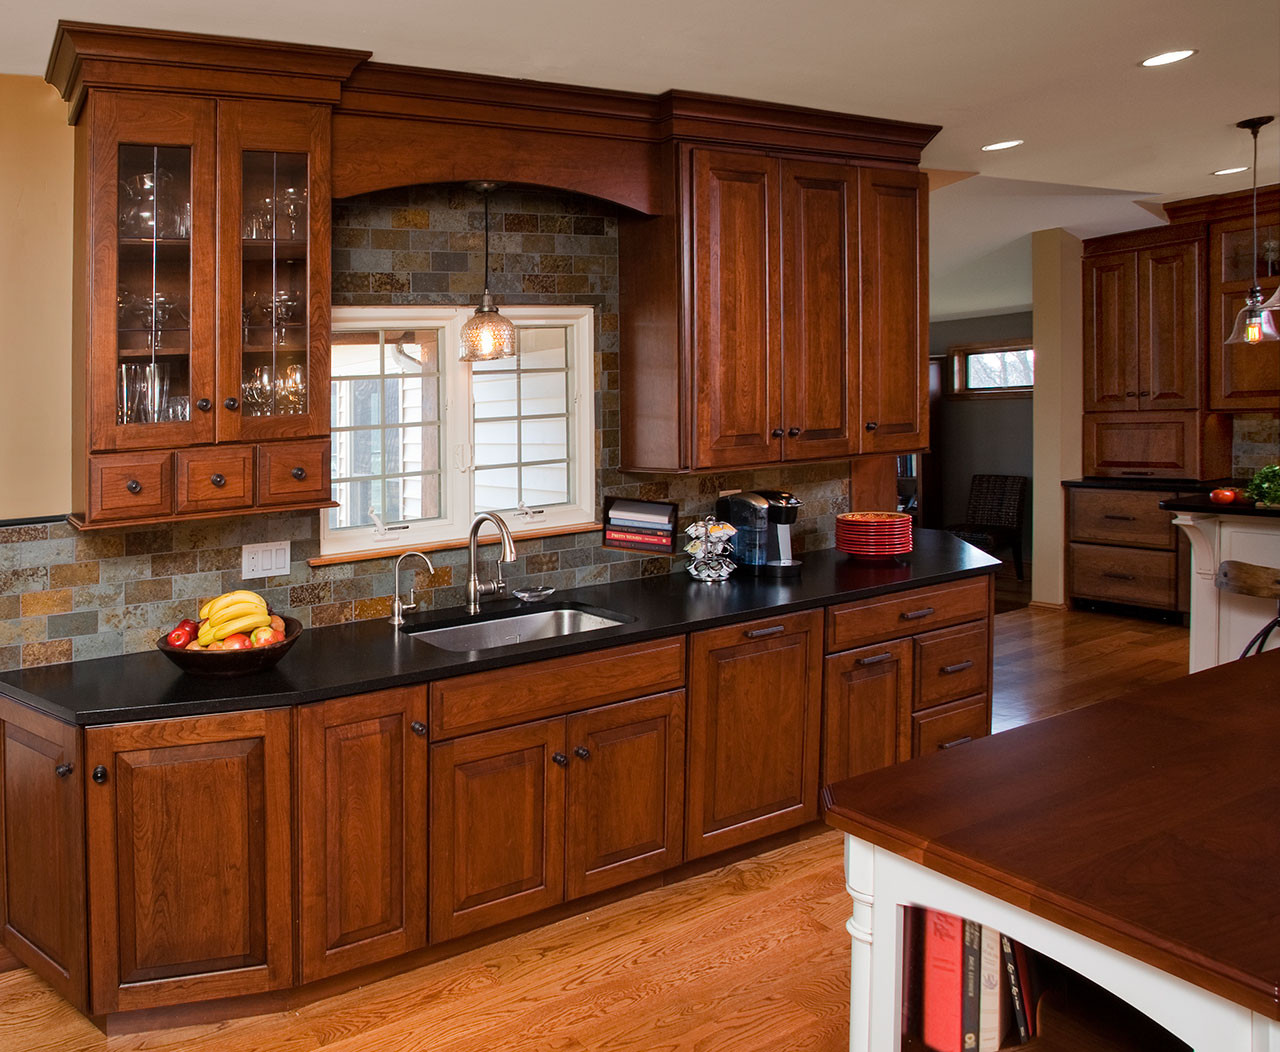 Kitchen Cabinets Design Ideas
 Traditional Kitchens Designs & Remodeling